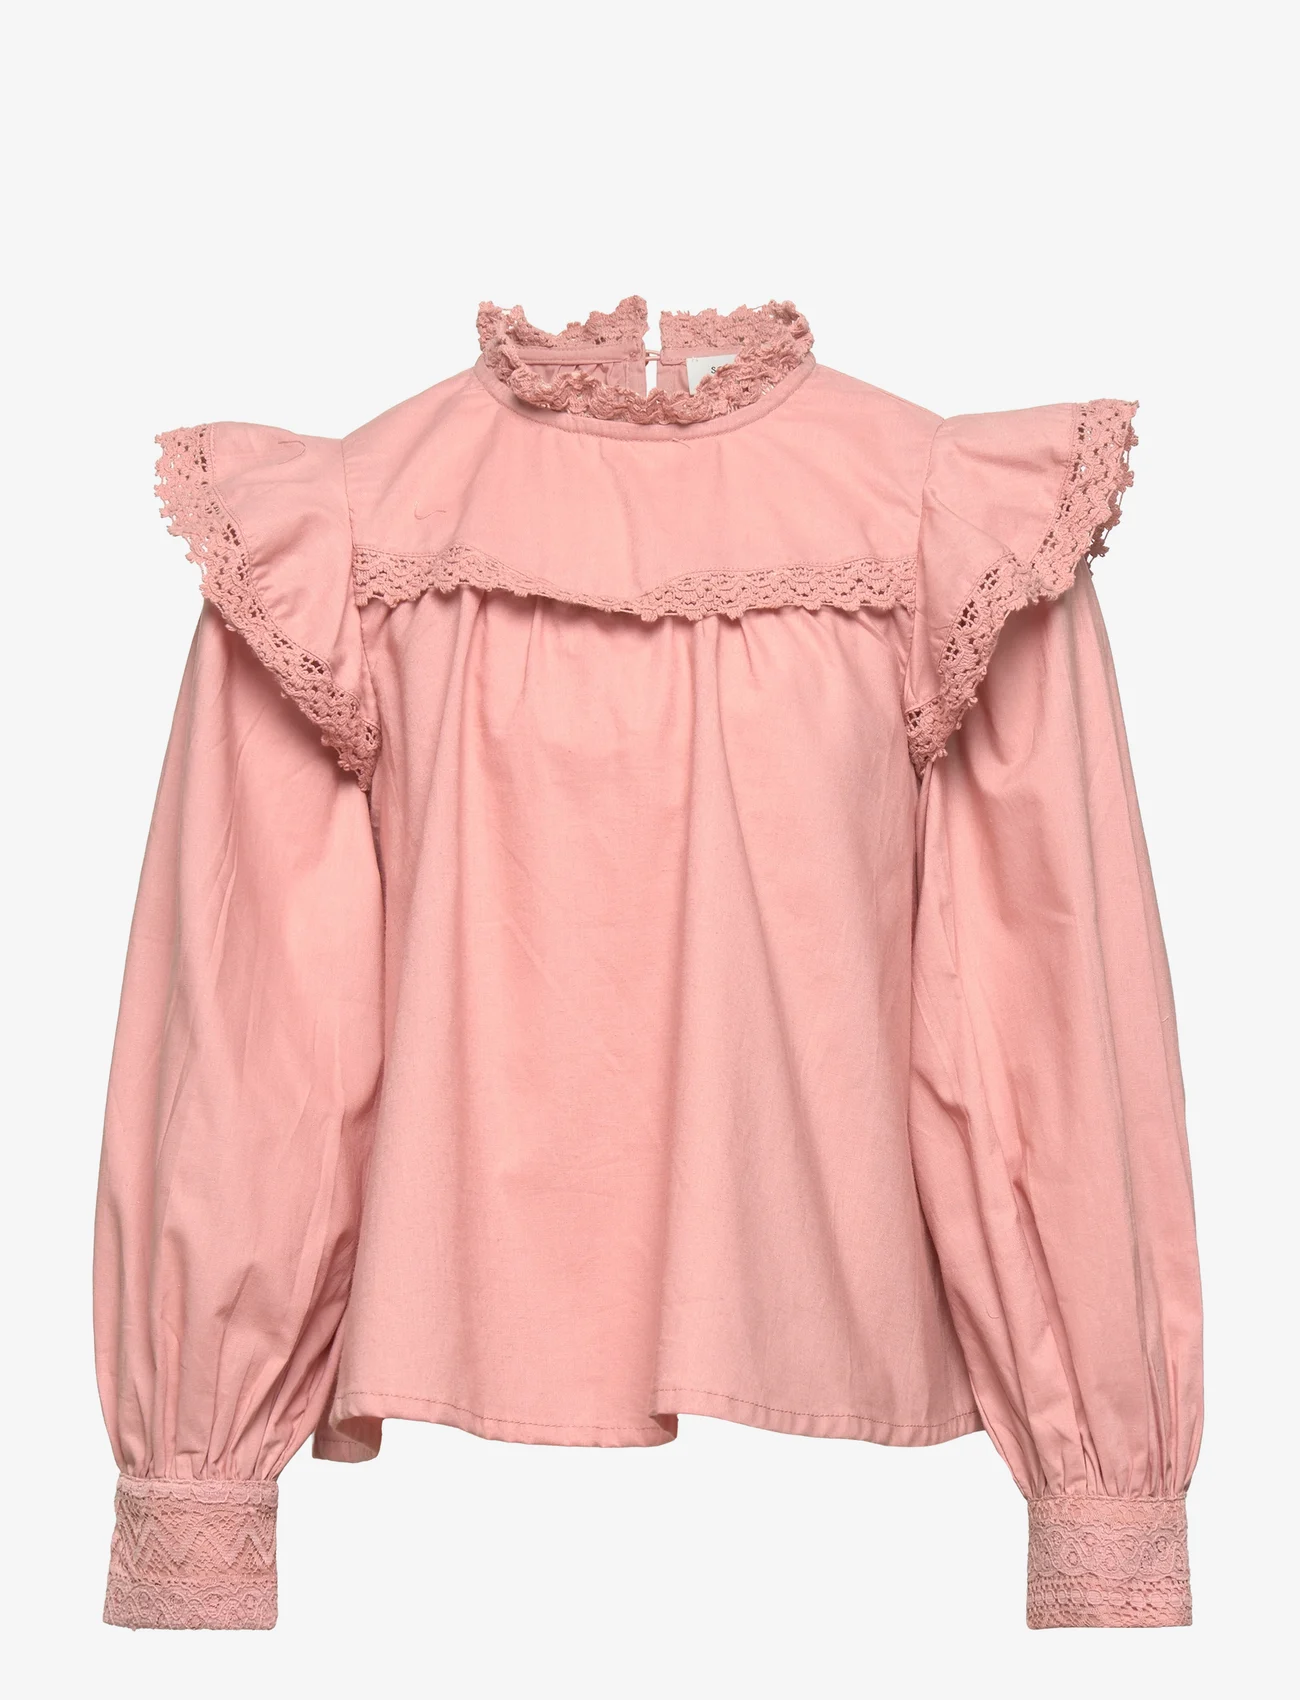 Sofie Schnoor Baby and Kids - Blouse - misty rose - 0